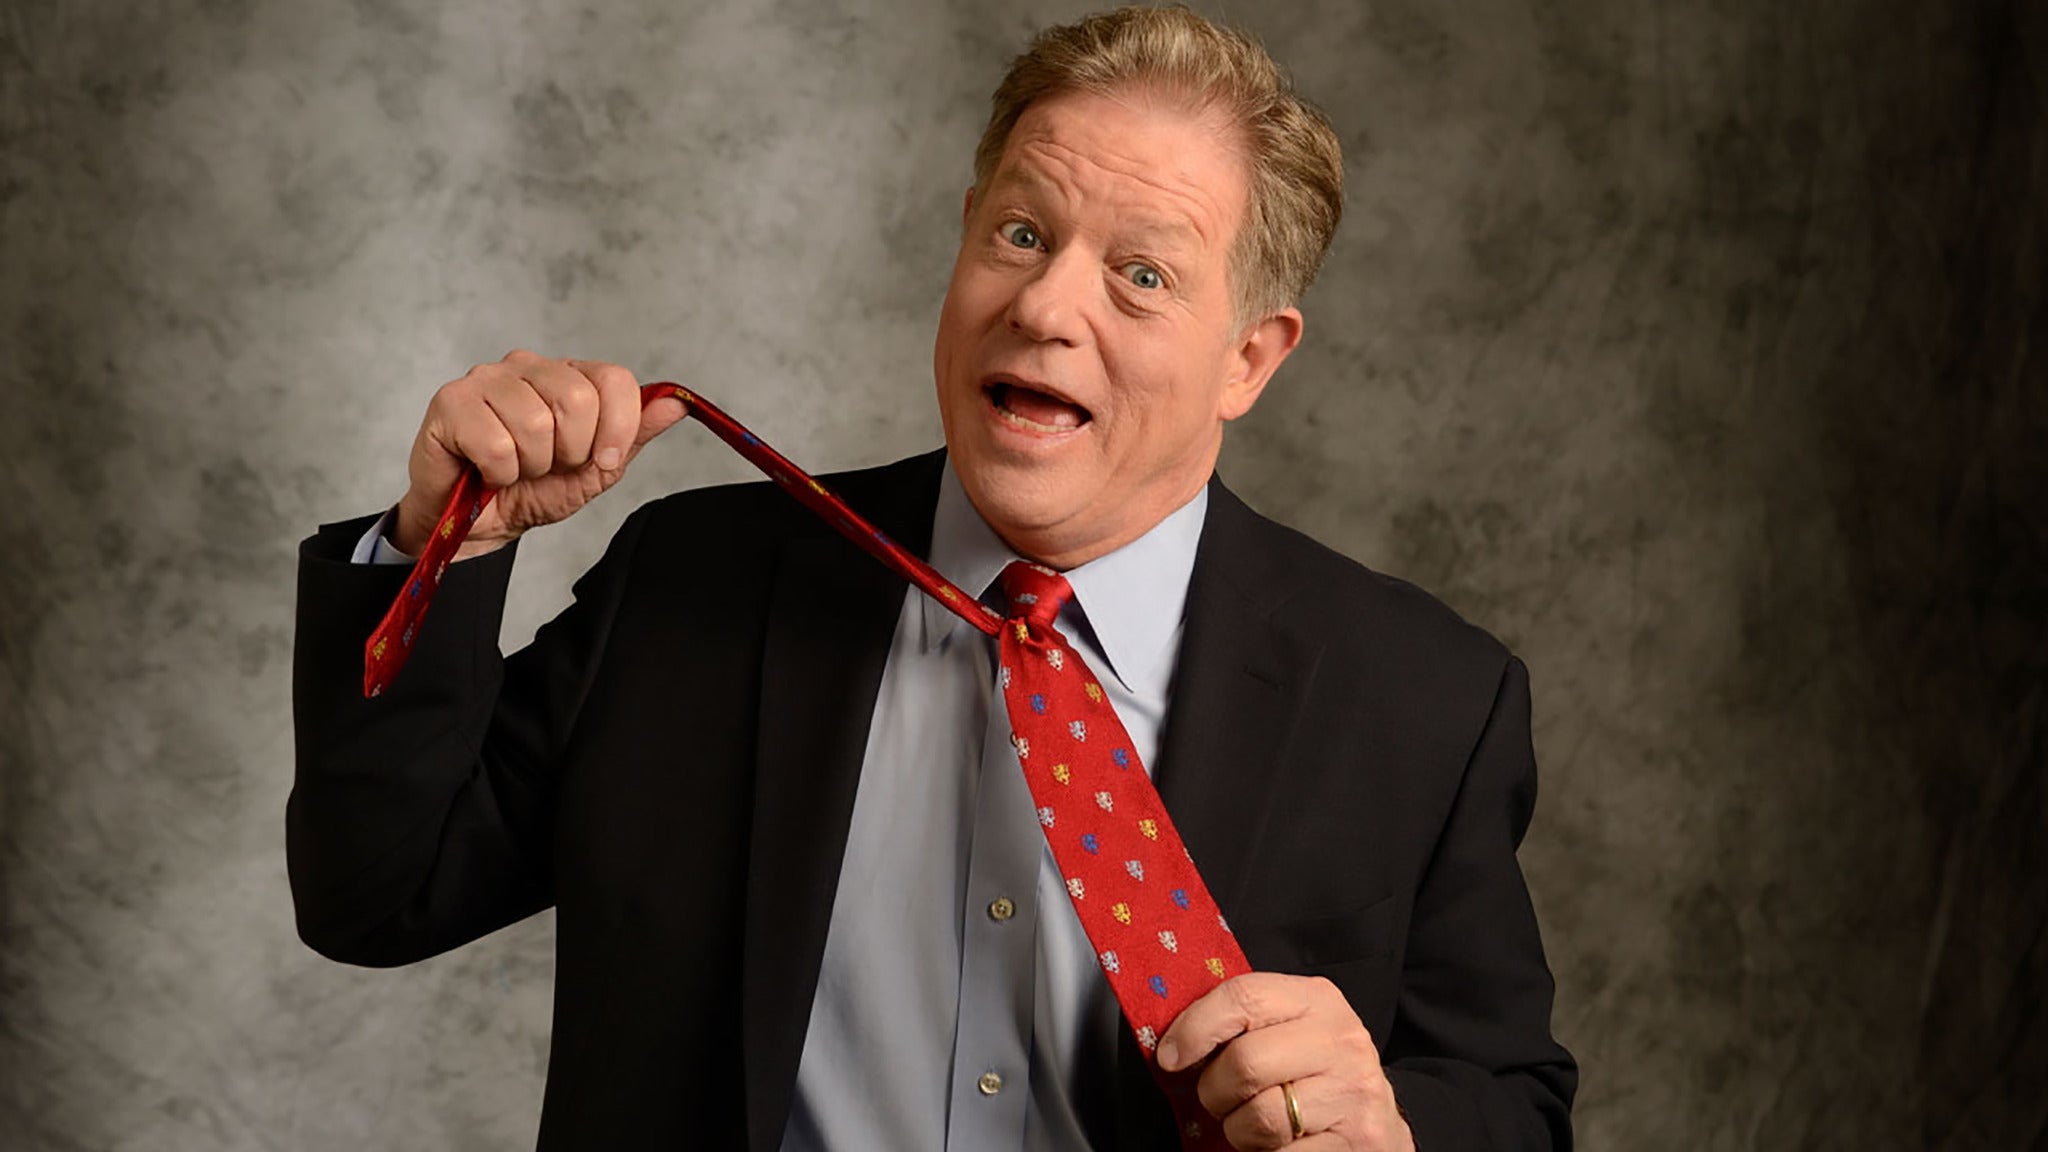 Jimmy Tingle presale password for advance tickets in Medford